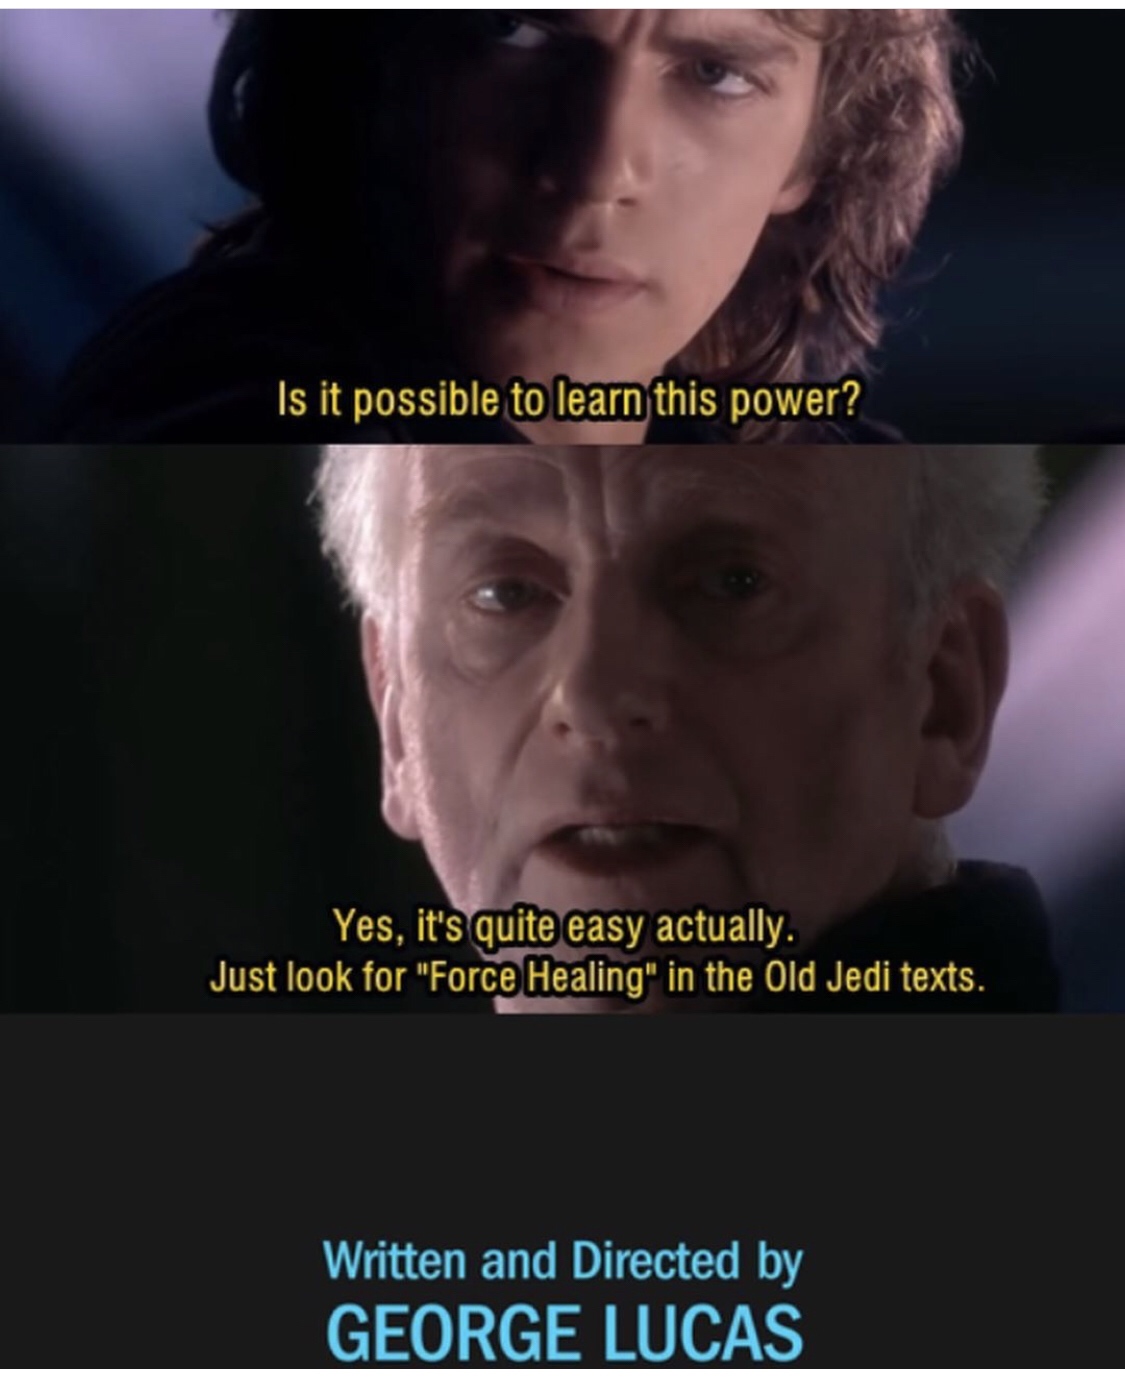 swgoh memes - 'Is it possible to learn this power? Yes, it's quite easy actually. Just look for "Force Healing" in the Old Jedi texts. Written and Directed by George Lucas